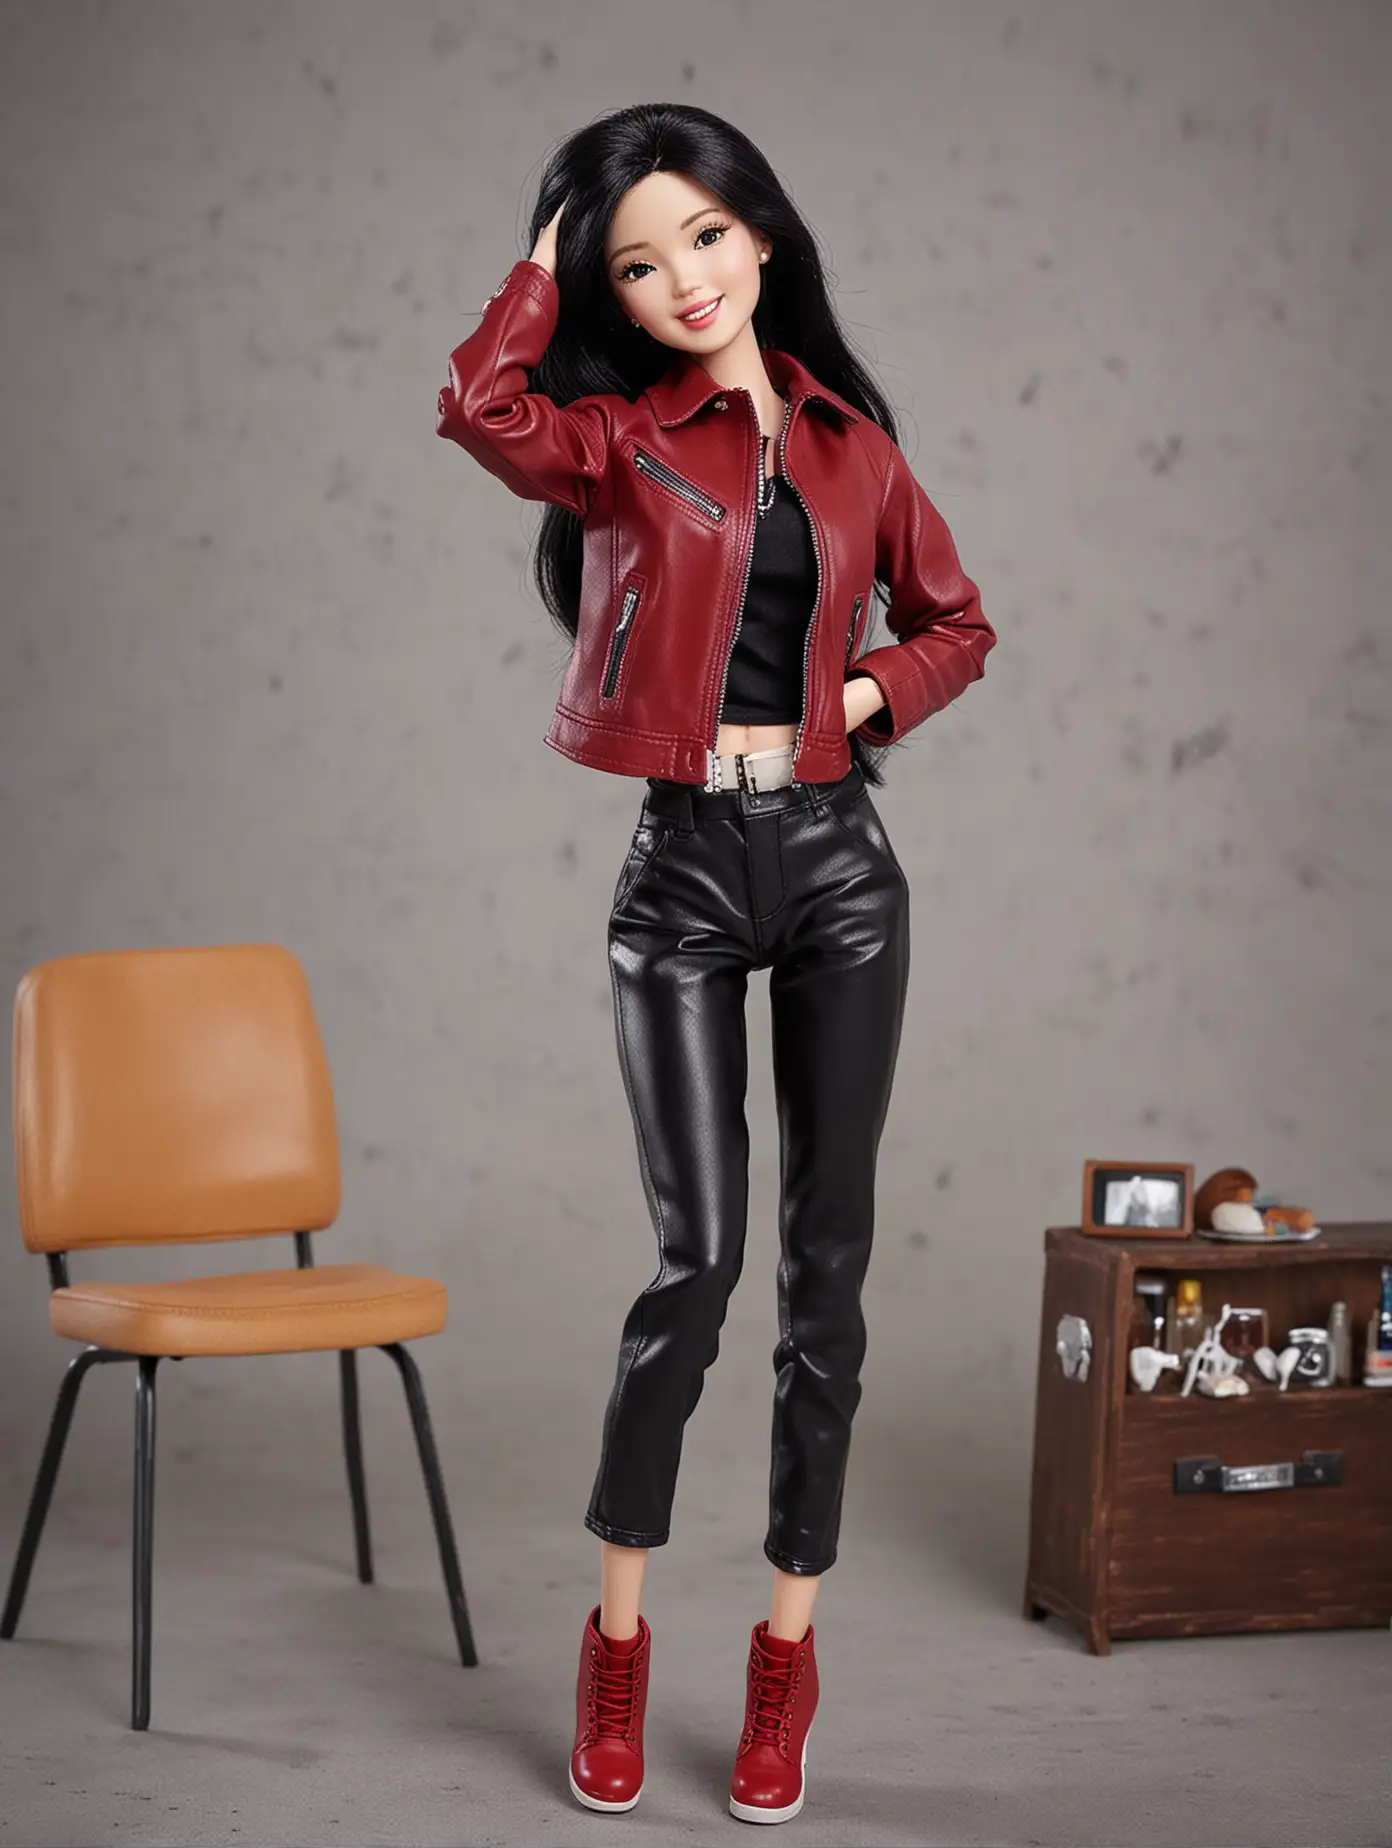 Laughing Teenage Barbie Doll in Maroon Leather Jacket and Red Shoes